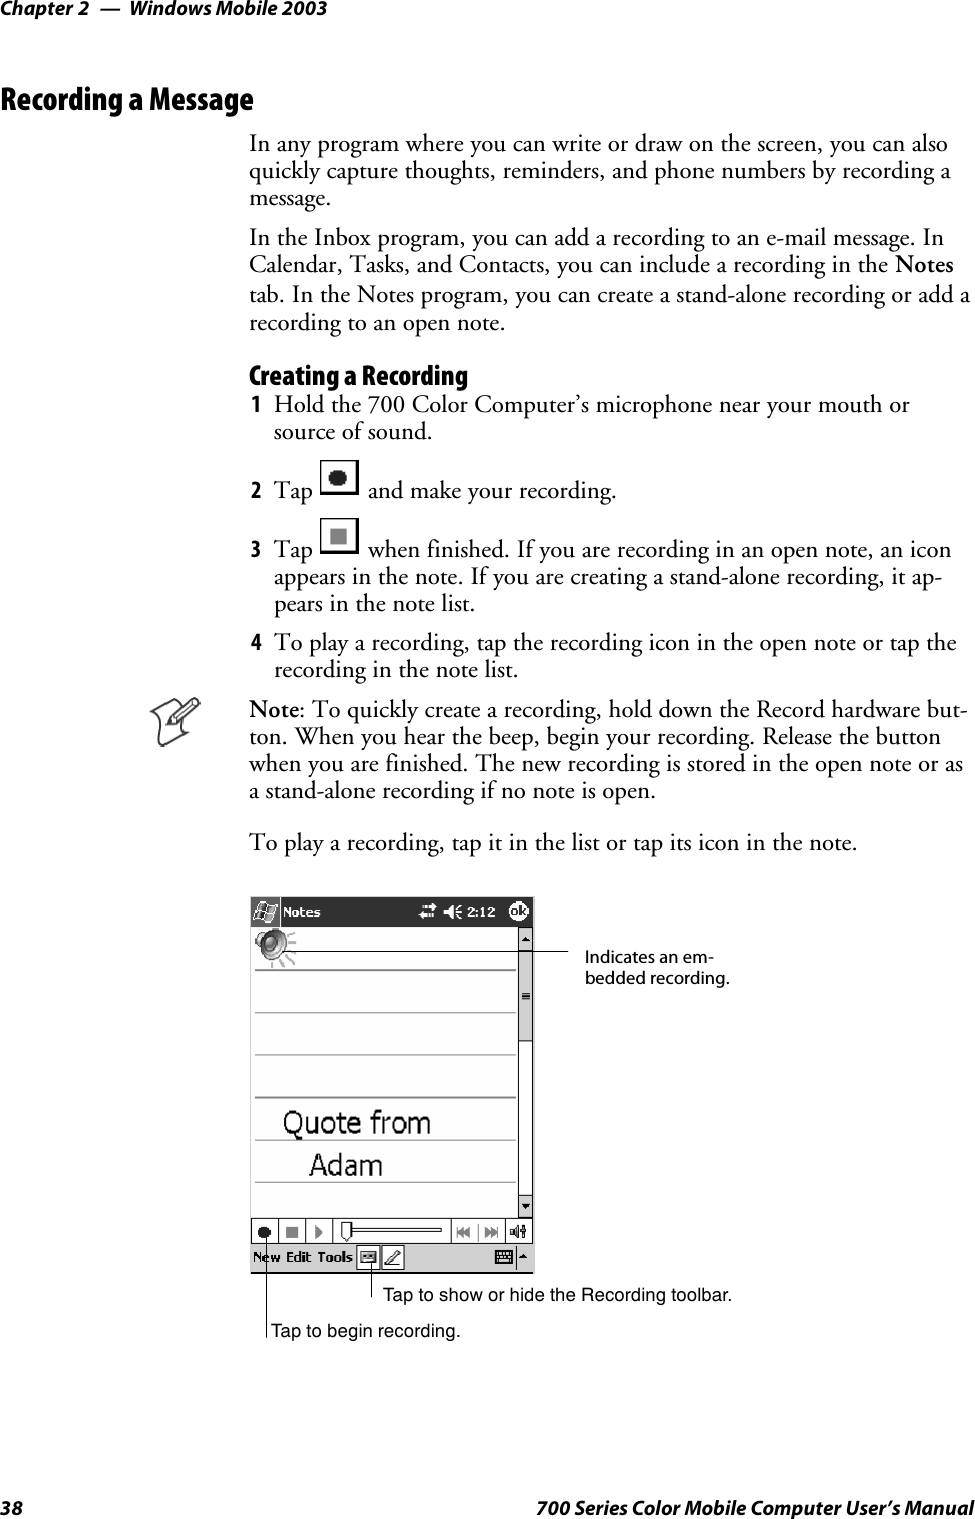 Windows Mobile 2003Chapter —238 700 Series Color Mobile Computer User’s ManualRecording a MessageIn any program where you can write or draw on the screen, you can alsoquickly capture thoughts, reminders, and phone numbers by recording amessage.In the Inbox program, you can add a recording to an e-mail message. InCalendar, Tasks, and Contacts, you can include a recording in the Notestab. In the Notes program, you can create a stand-alone recording or add arecording to an open note.Creating a Recording1Hold the 700 Color Computer’s microphone near your mouth orsource of sound.2Tap and make your recording.3Tap when finished. If you are recording in an open note, an iconappears in the note. If you are creating a stand-alone recording, it ap-pears in the note list.4To play a recording, tap the recording icon in the open note or tap therecording in the note list.Note: To quickly create a recording, hold down the Record hardware but-ton. When you hear the beep, begin your recording. Release the buttonwhen you are finished. The new recording is stored in the open note or asa stand-alone recording if no note is open.To play a recording, tap it in the list or tap its icon in the note.Indicates an em-bedded recording.Tap to begin recording.Tap to show or hide the Recording toolbar.